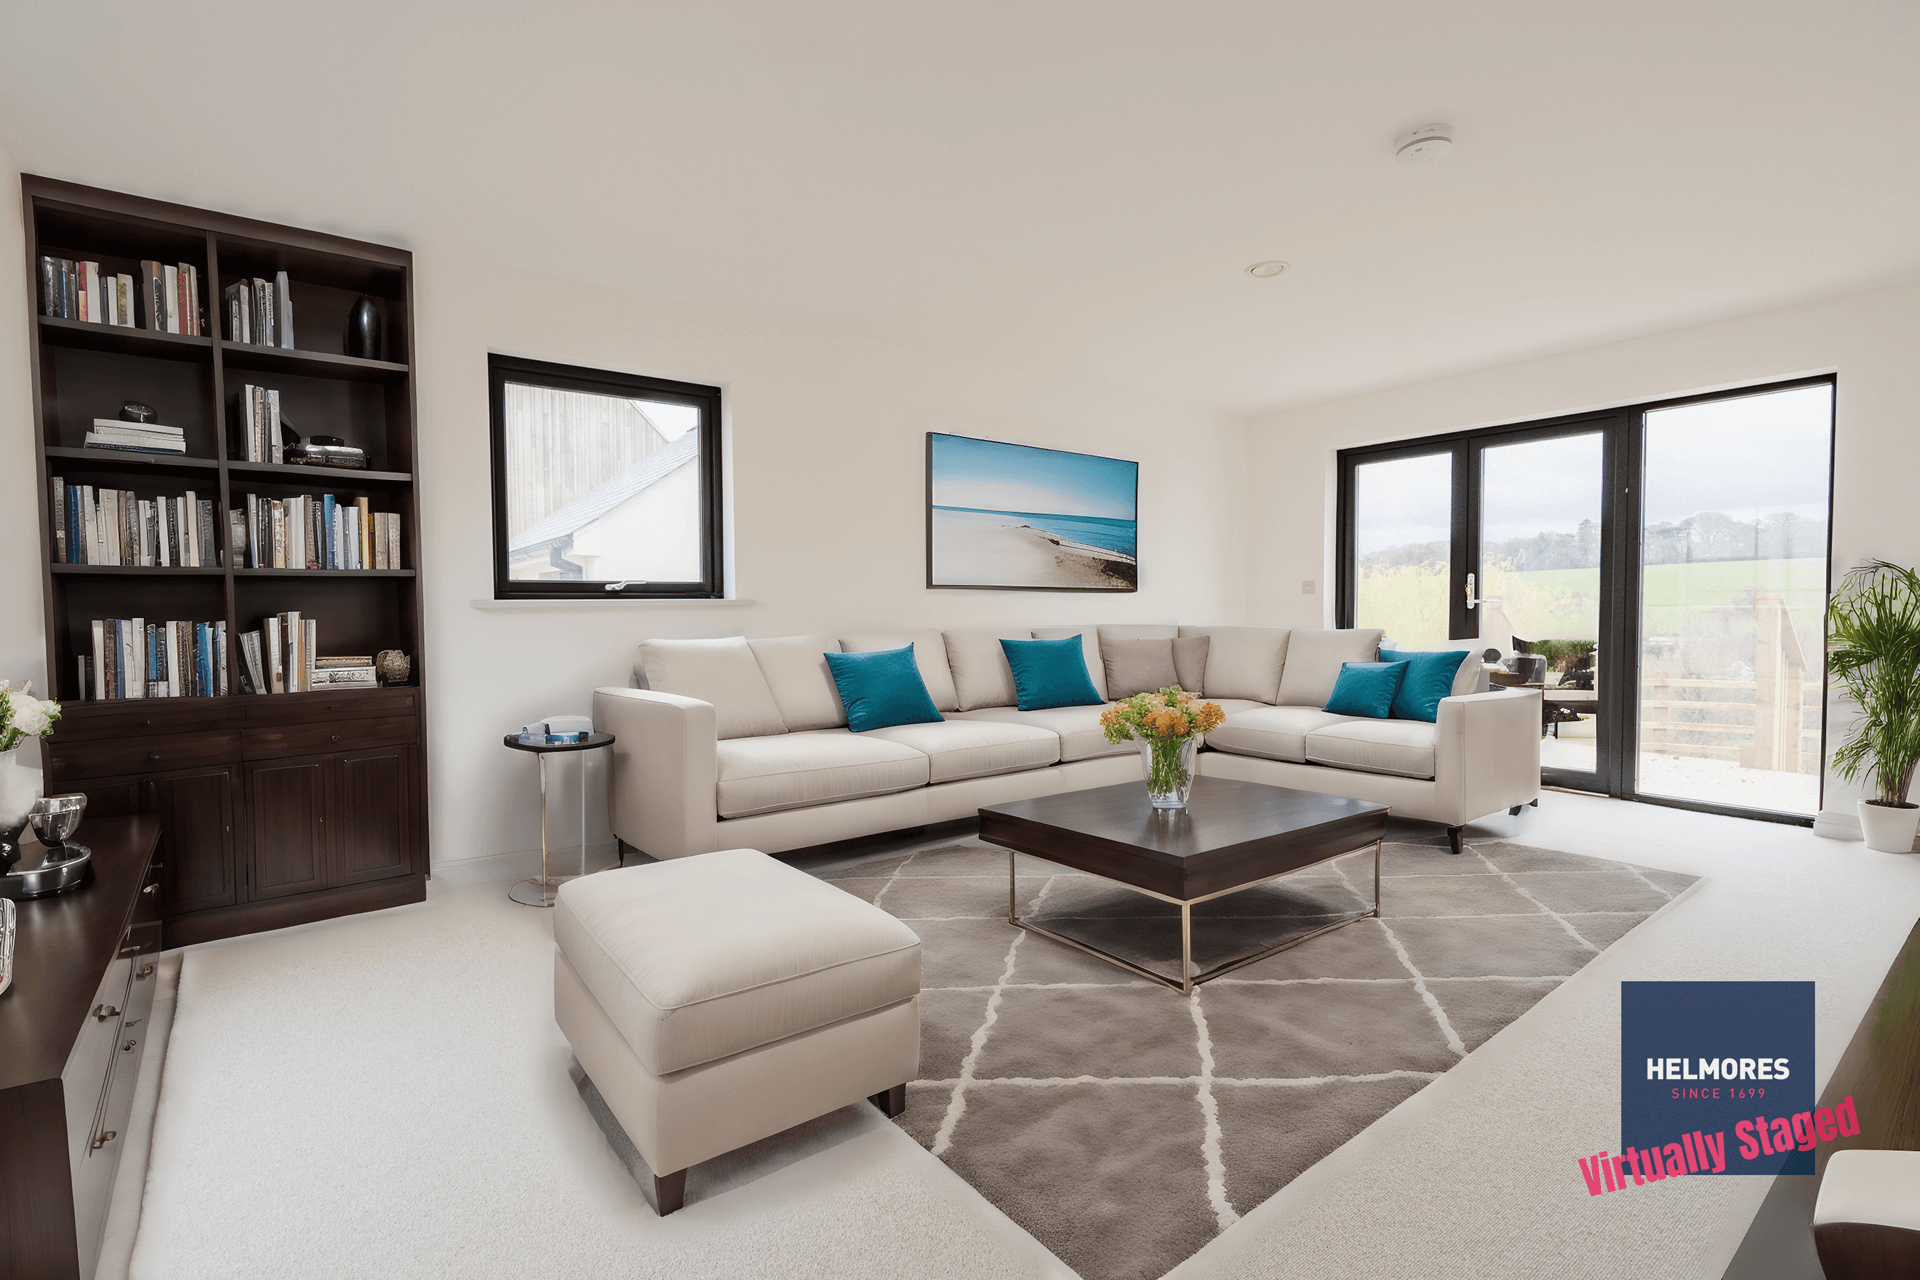 Helmores-Virtual-Staging-Living-Room-Staged